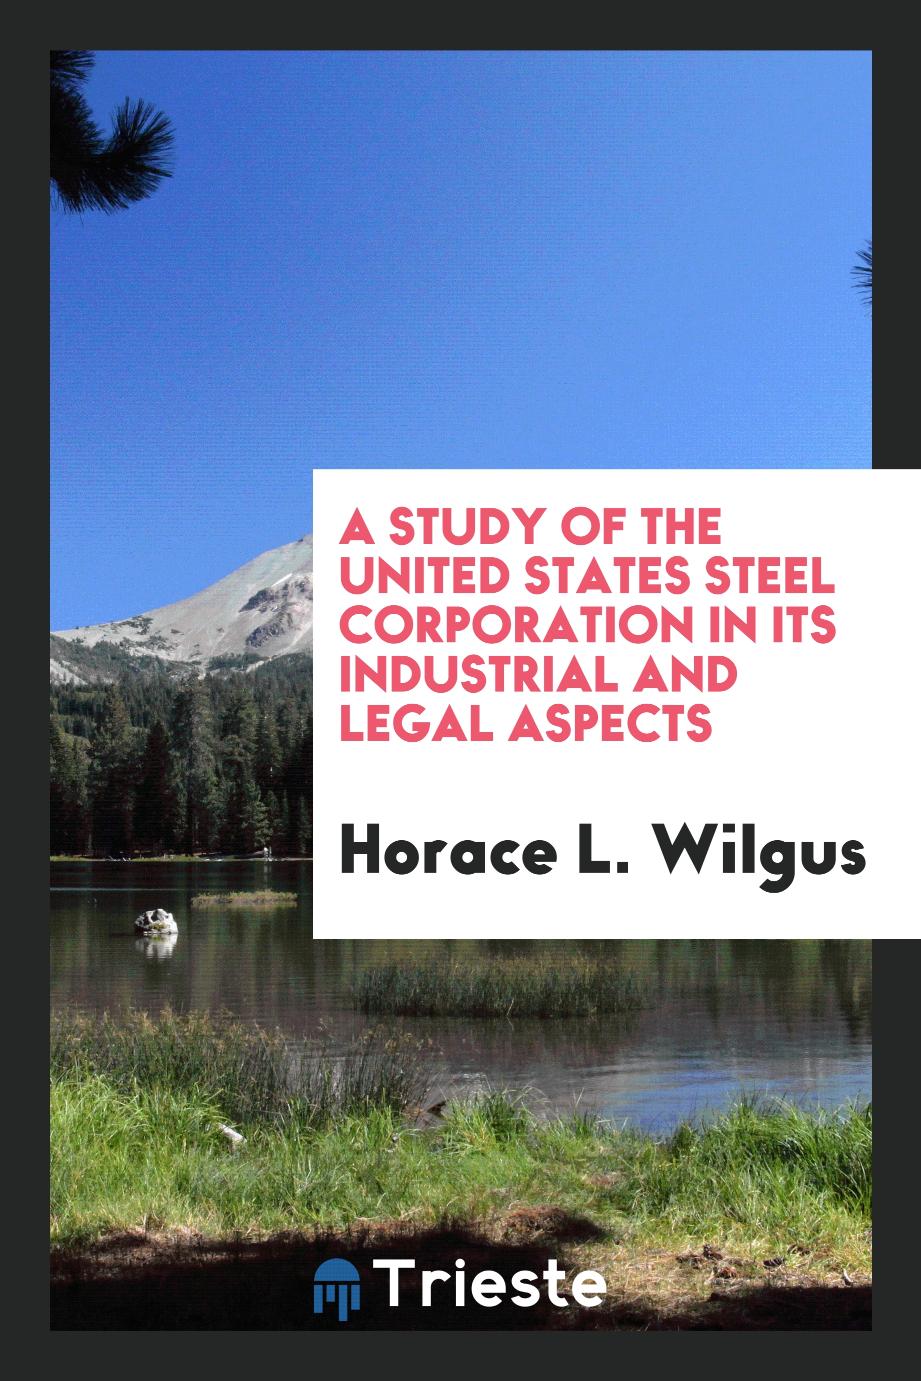 A study of the United States Steel Corporation in its industrial and legal aspects